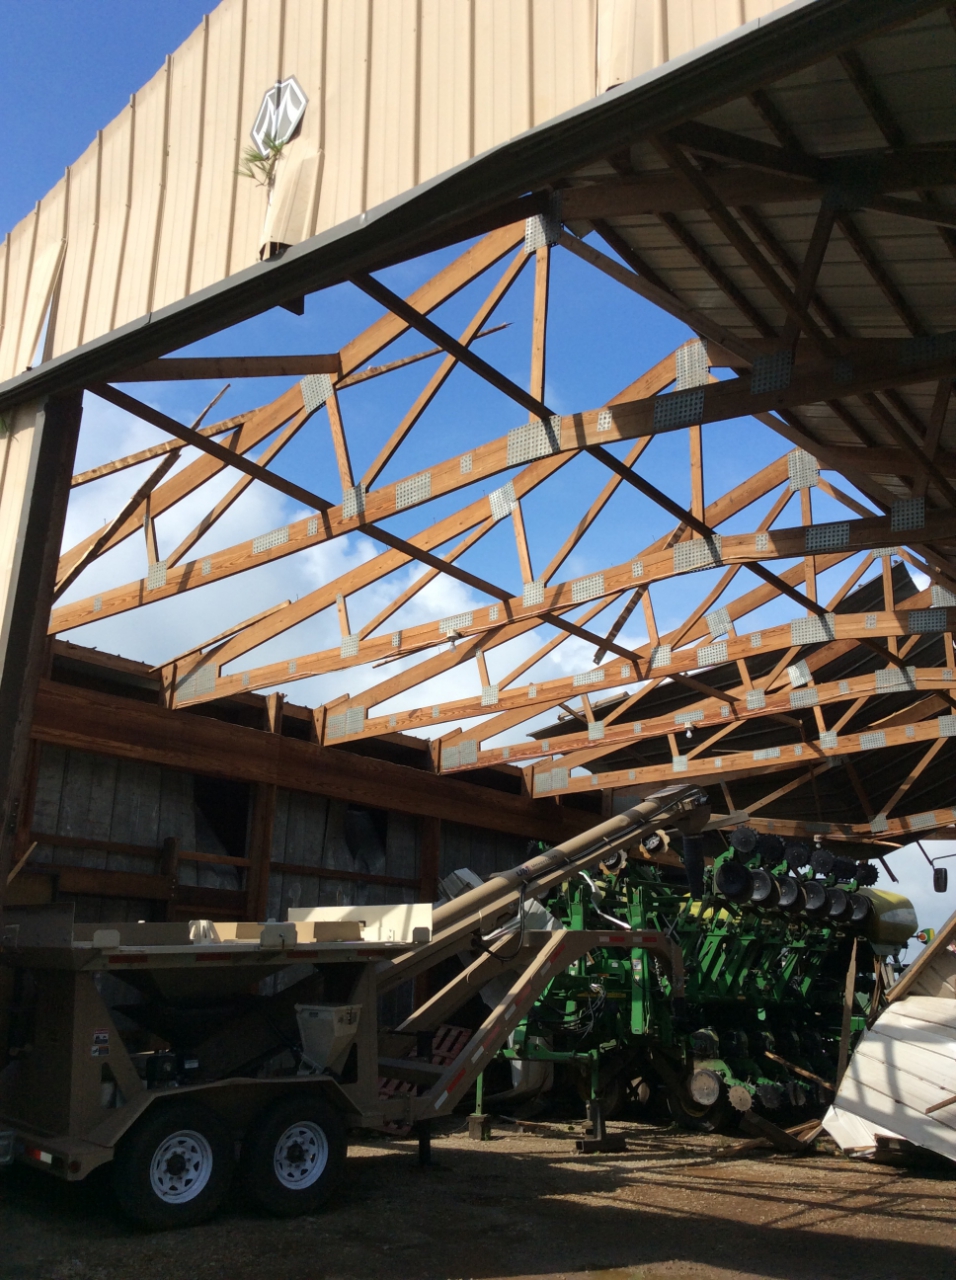 Much of a roof was removed from a machine shed